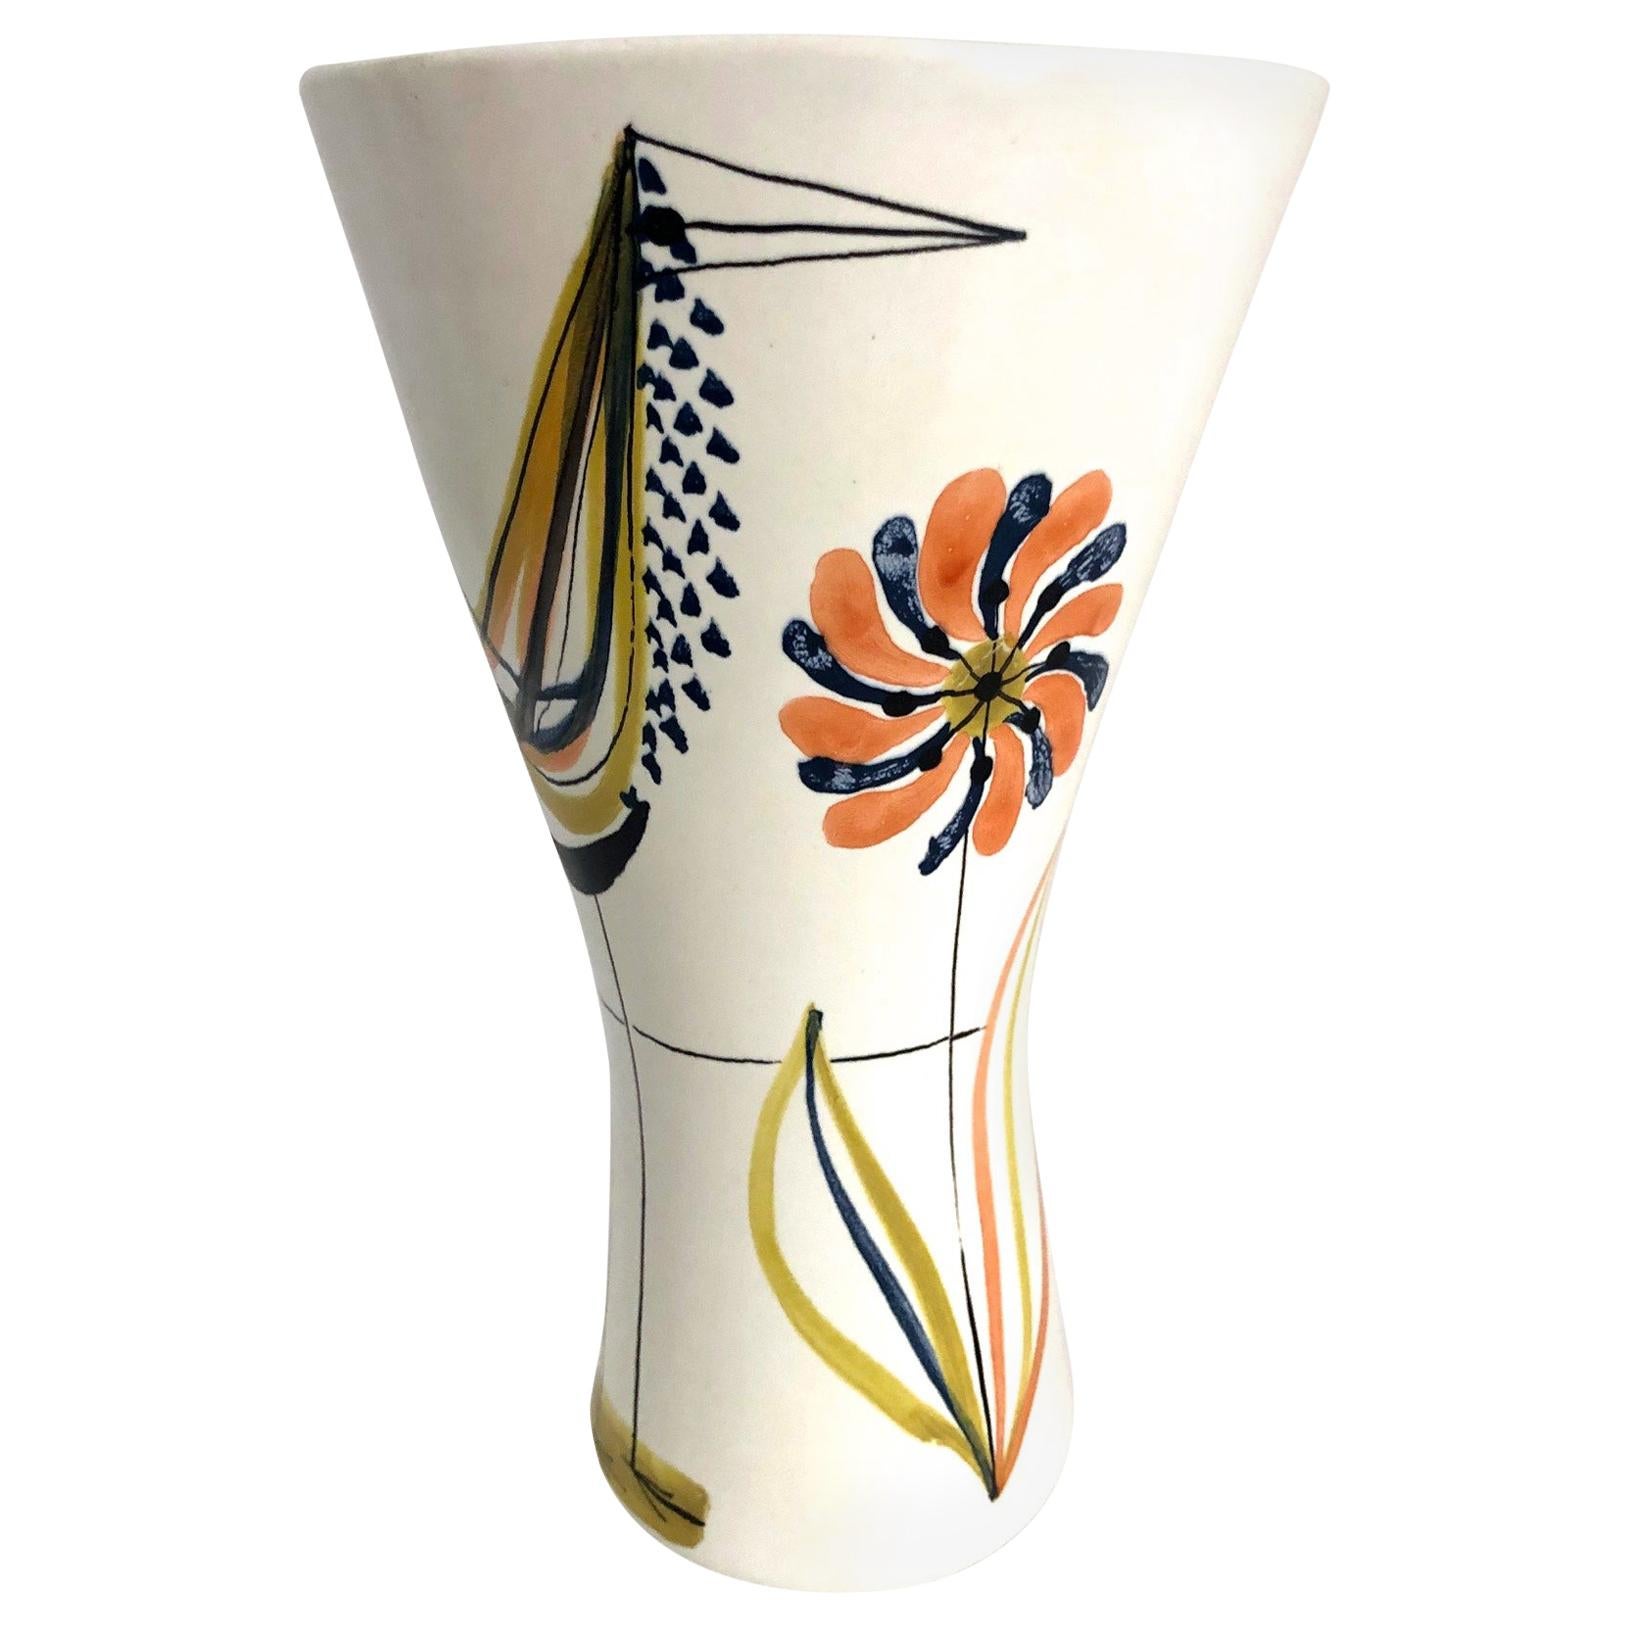 Ceramic Vase with Bird and Flower Signed by Roger Capron Vallauris, 1950s